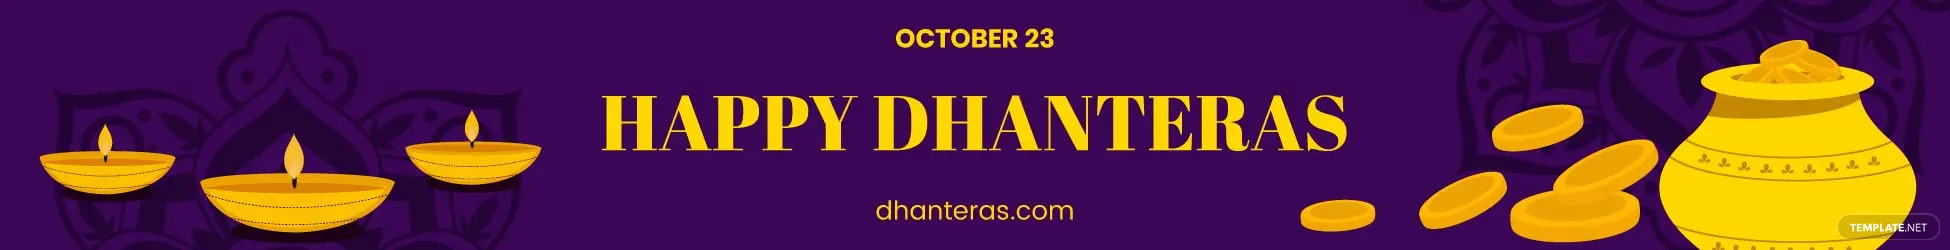 dhanteras website banner ideas and examples